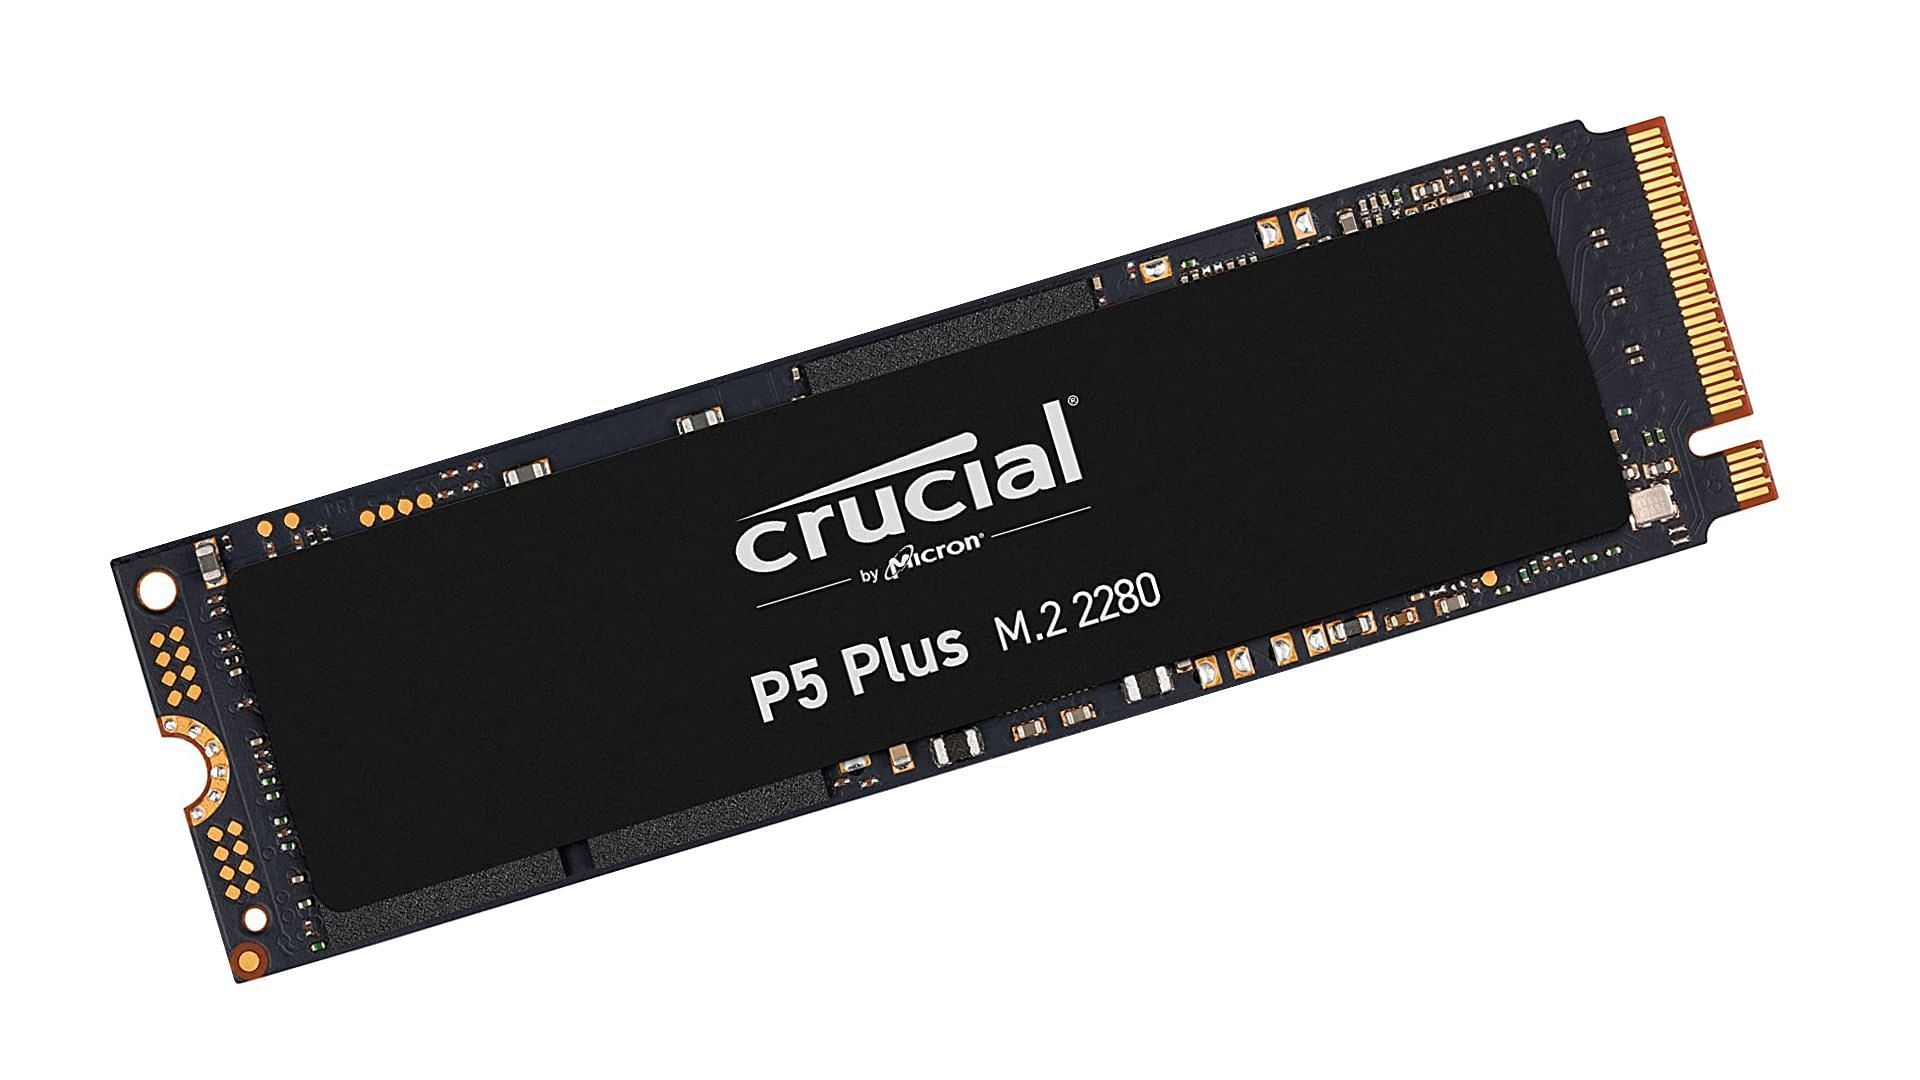 The Crucial P5 Plus NVMe SSD (Image via Crucial)